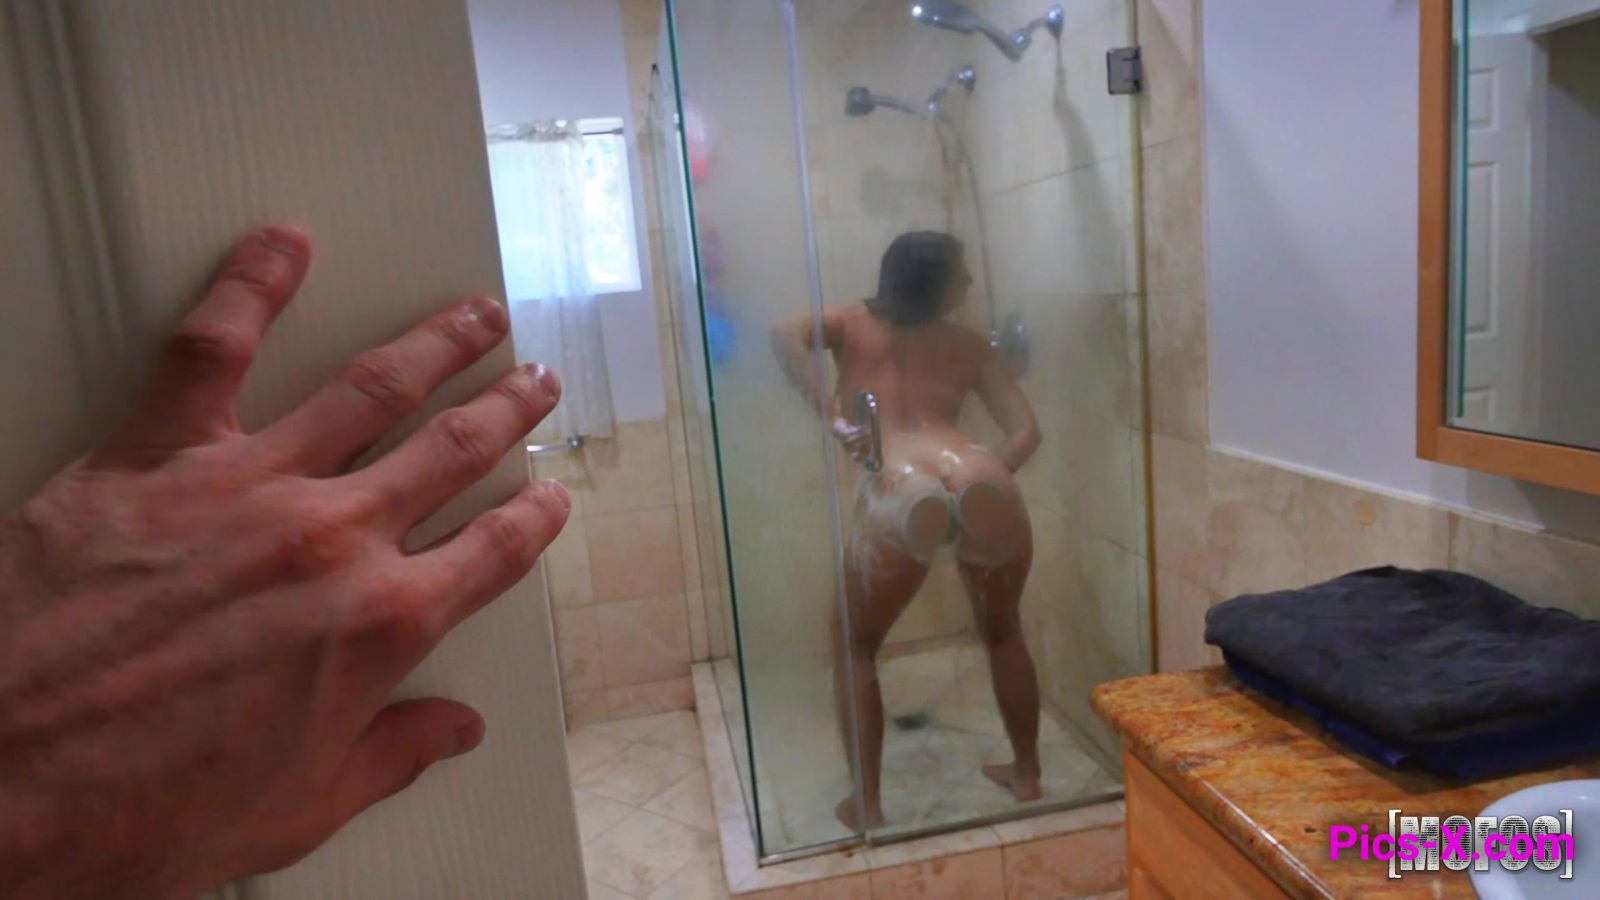 Anal In The Shower - Pervs On Patrol - Image 5